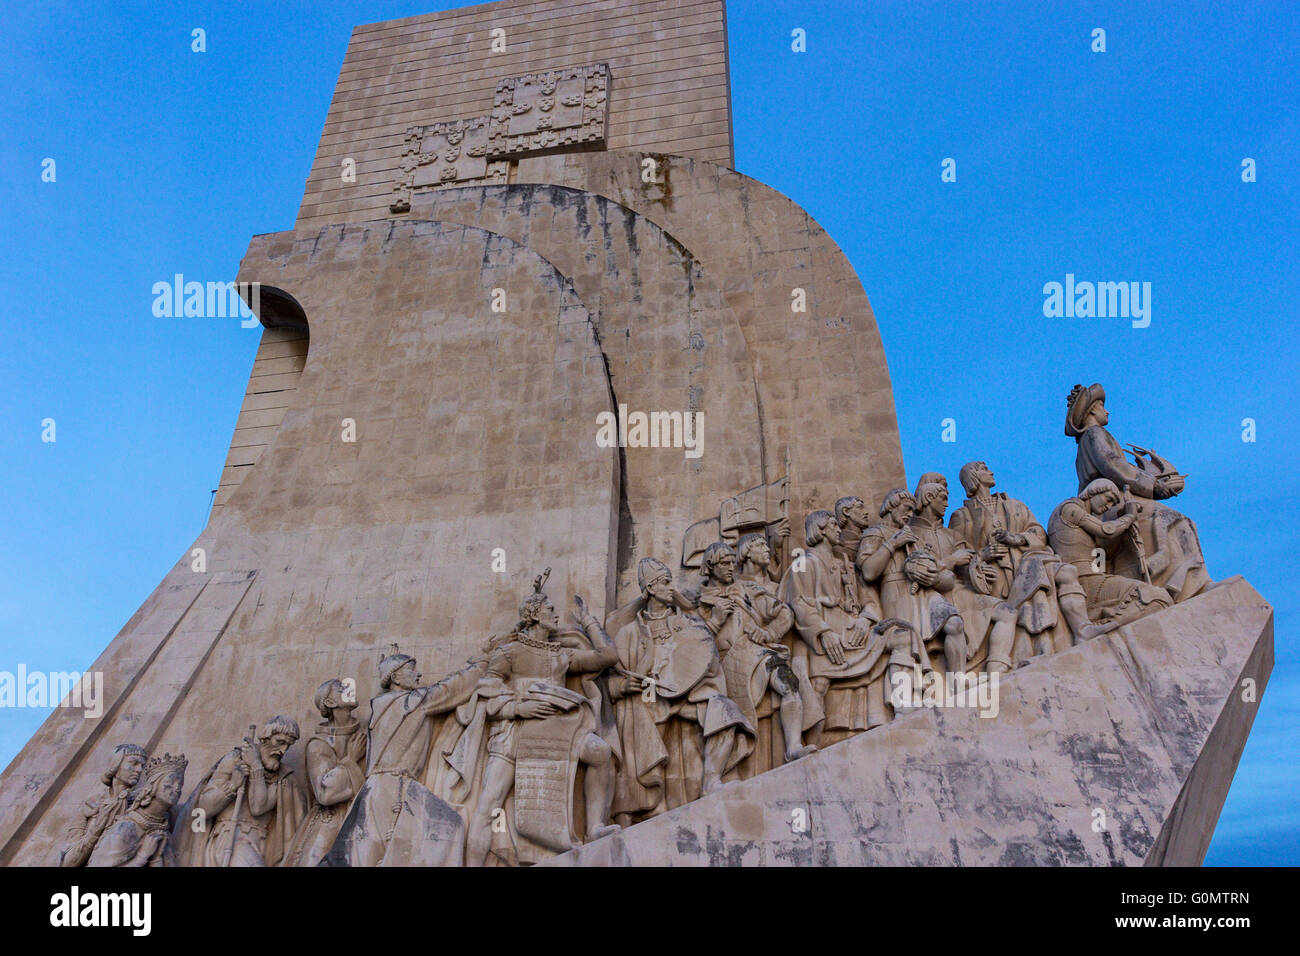 Monument to the Discoveries in Belem in Portugal Stock Photo